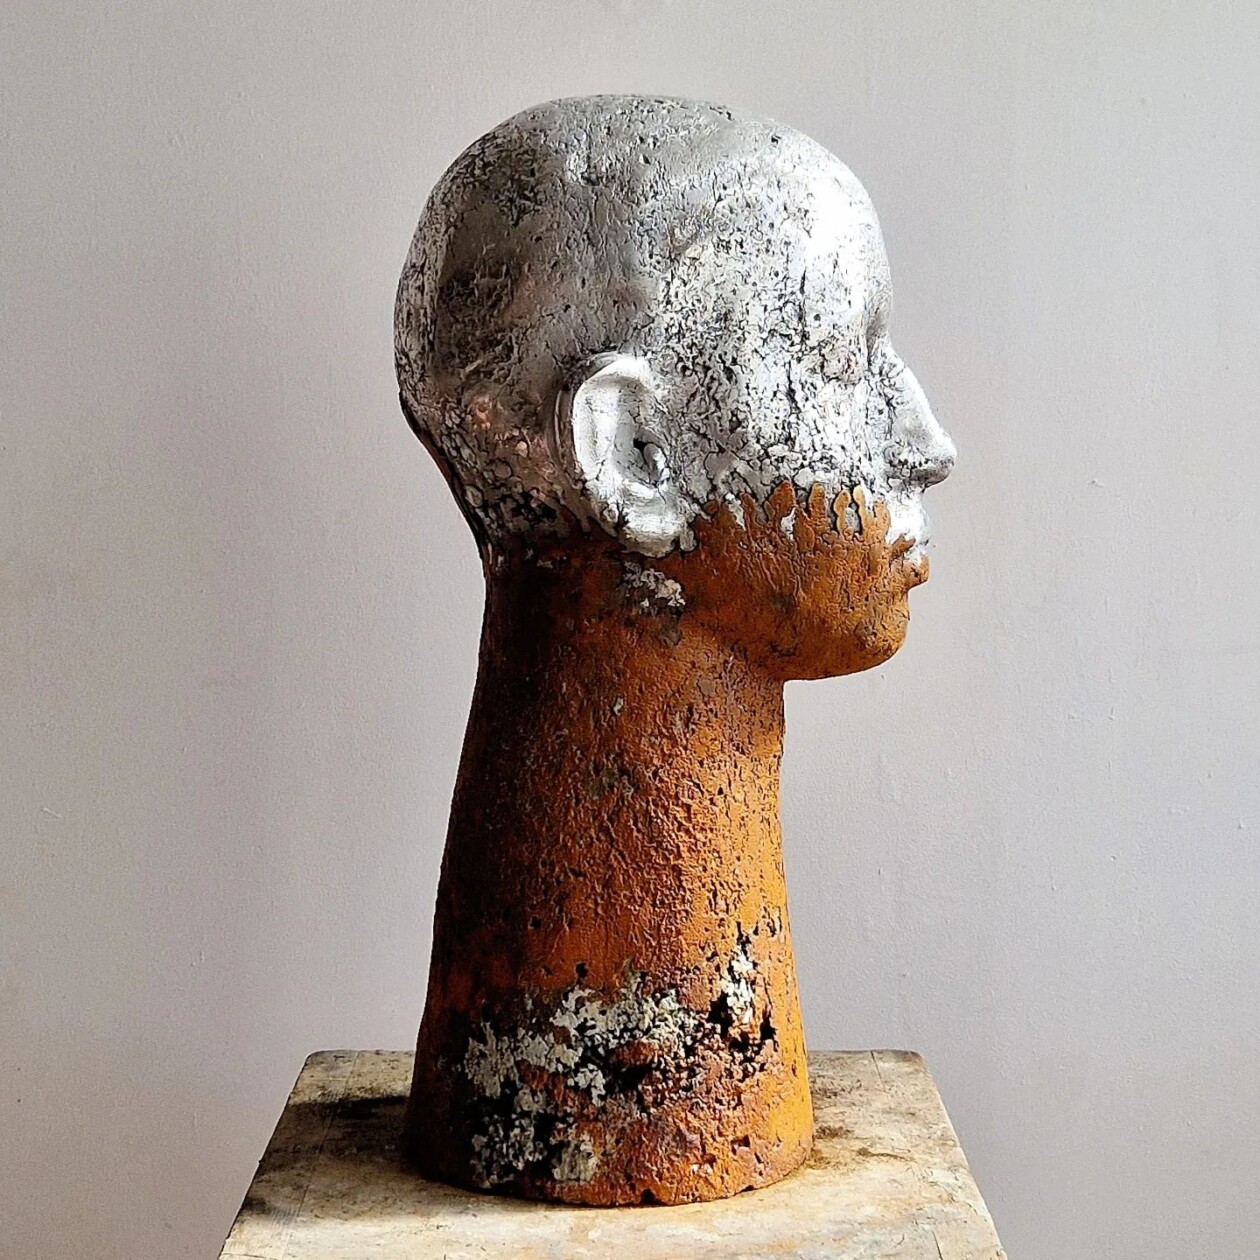 Reflections Of The Soul, The Sculptural Emotions Of Samuel Salcedo (17)